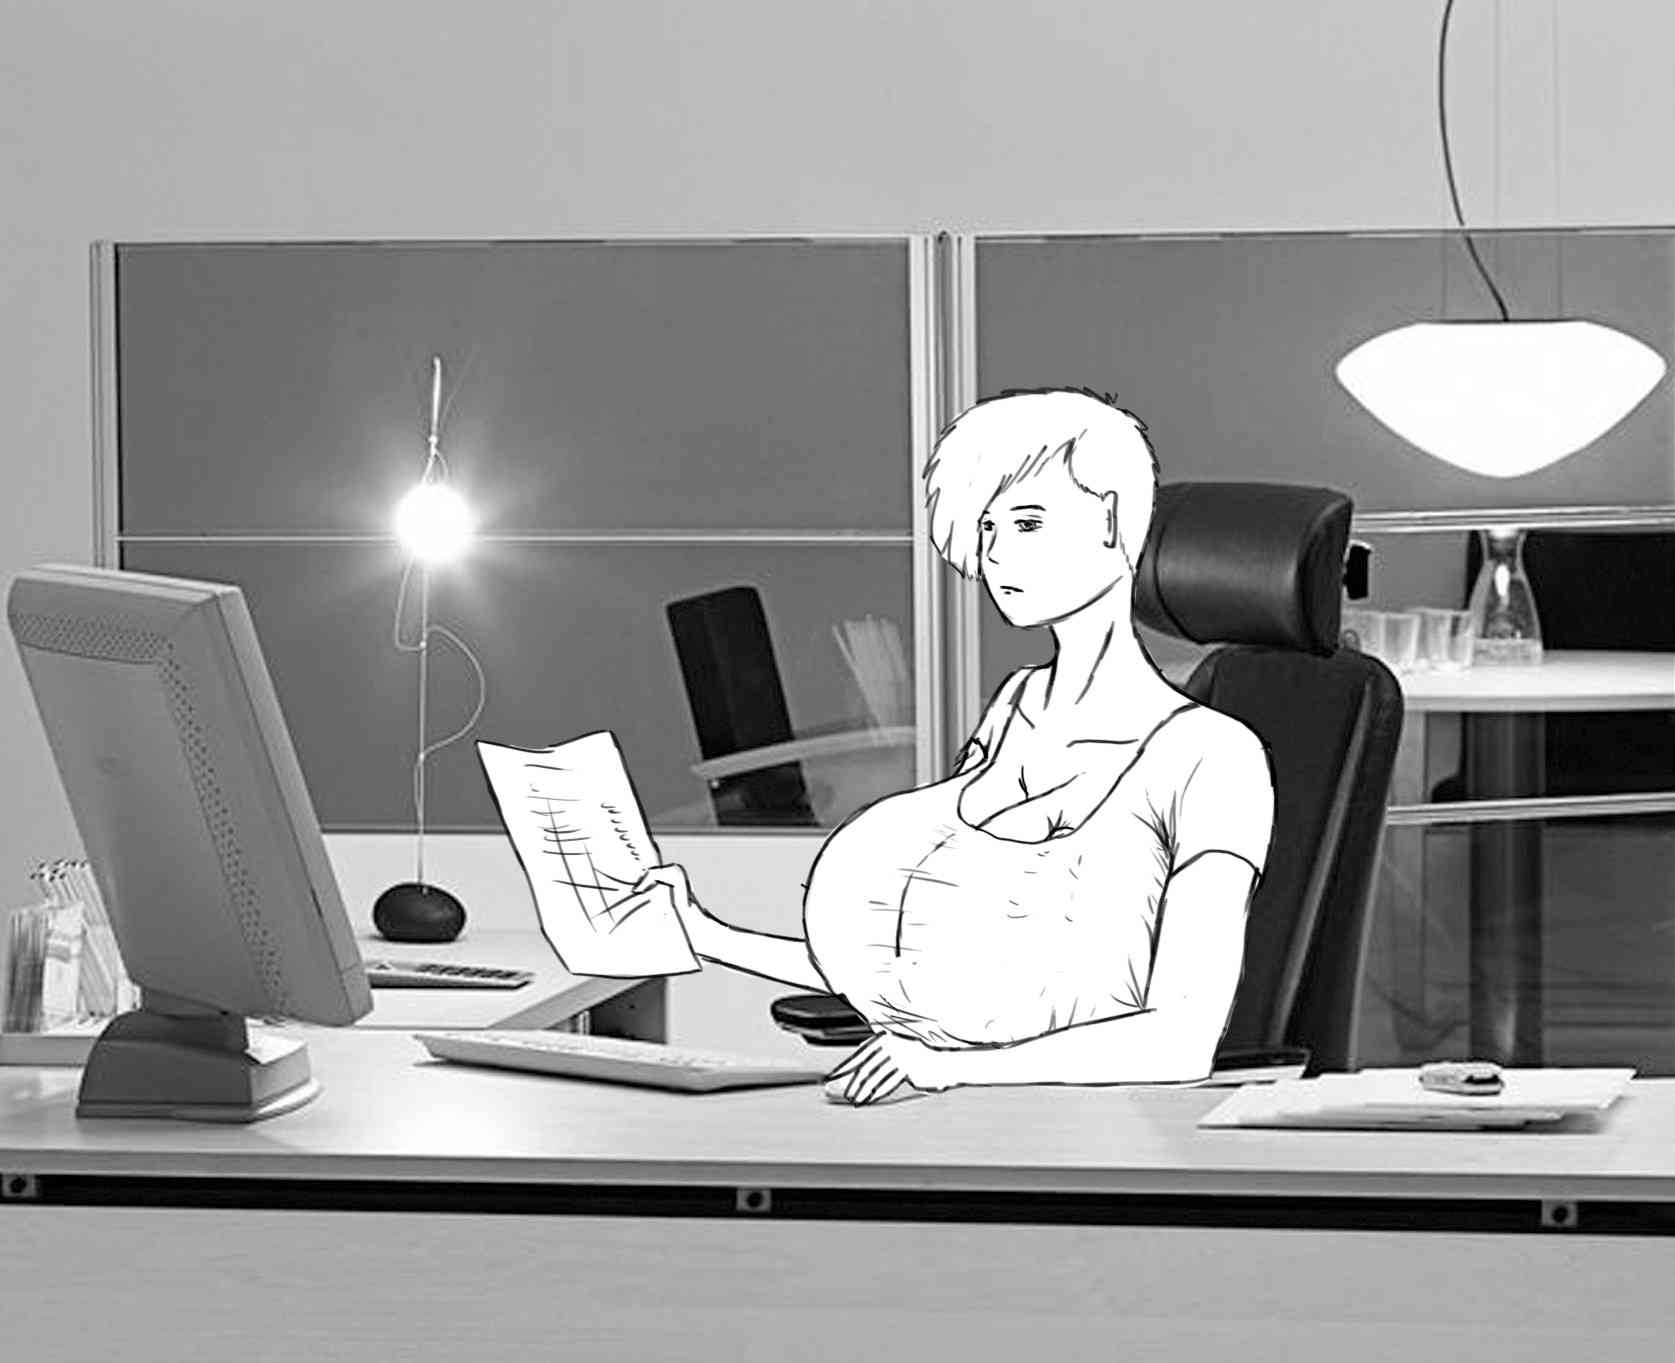 Sitting at her desk, holding paper, looking bored